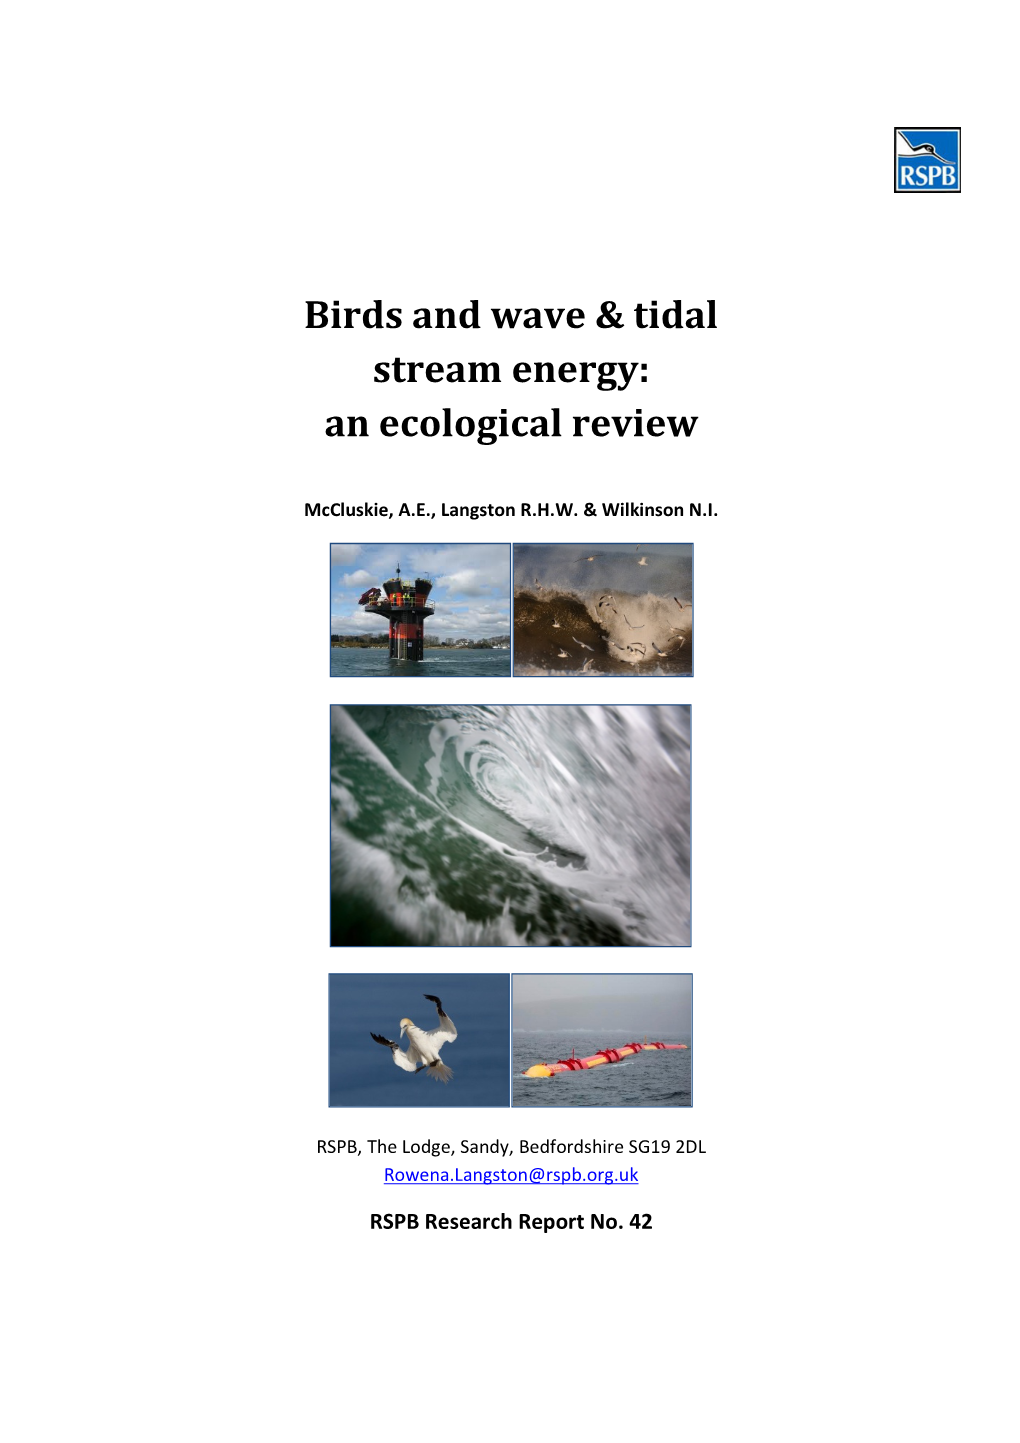 Birds and Wave & Tidal Stream Energy